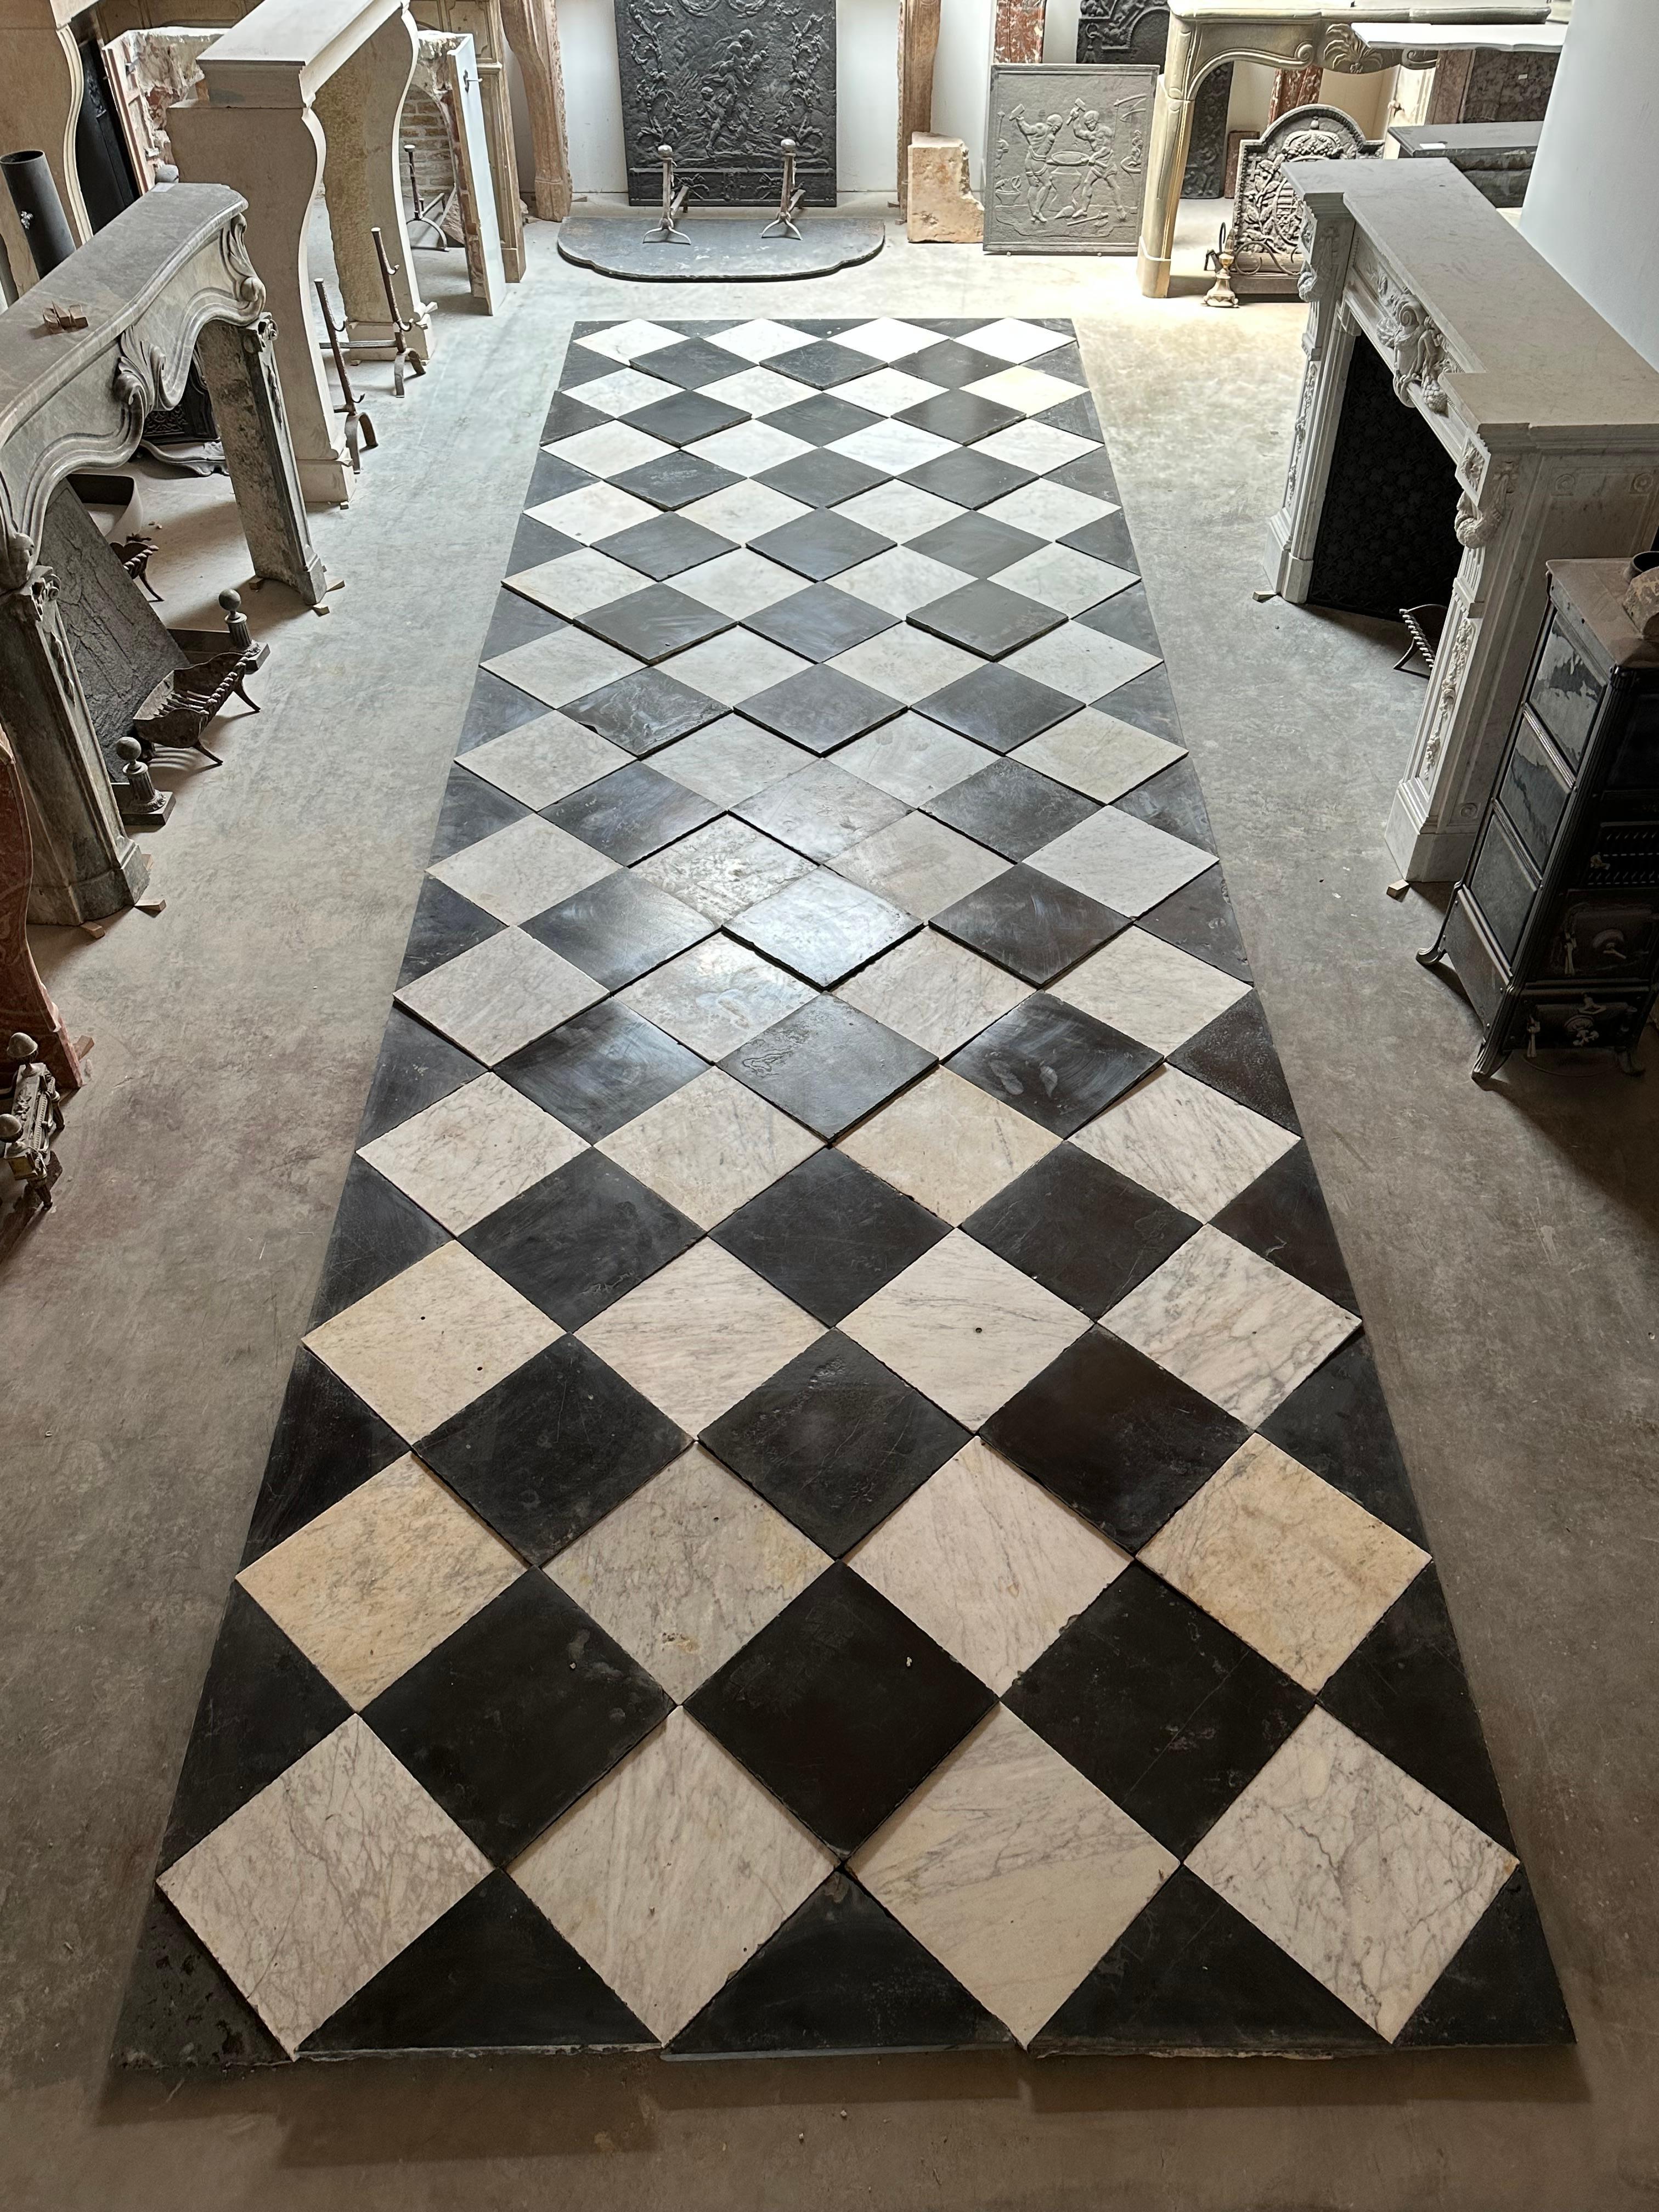 marble floor with black border